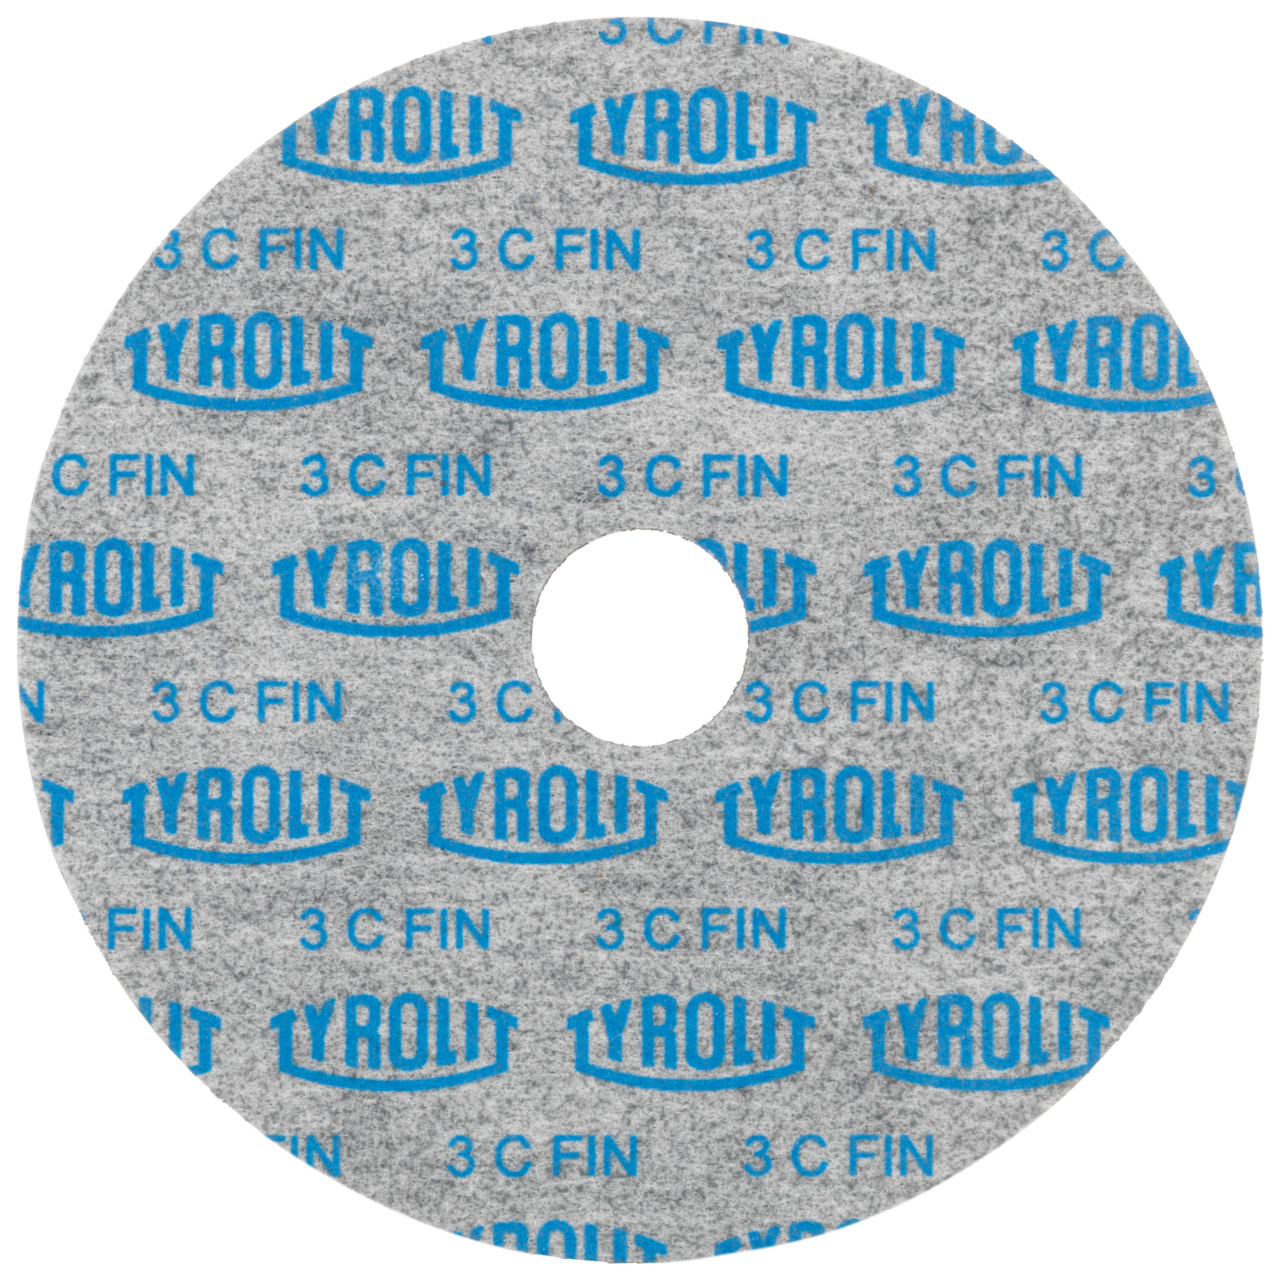 Tyrolit Pressed compact discs DxDxH 127x6x22.2 Universally applicable, 3 C FEIN, shape: 1, Art. 34190123